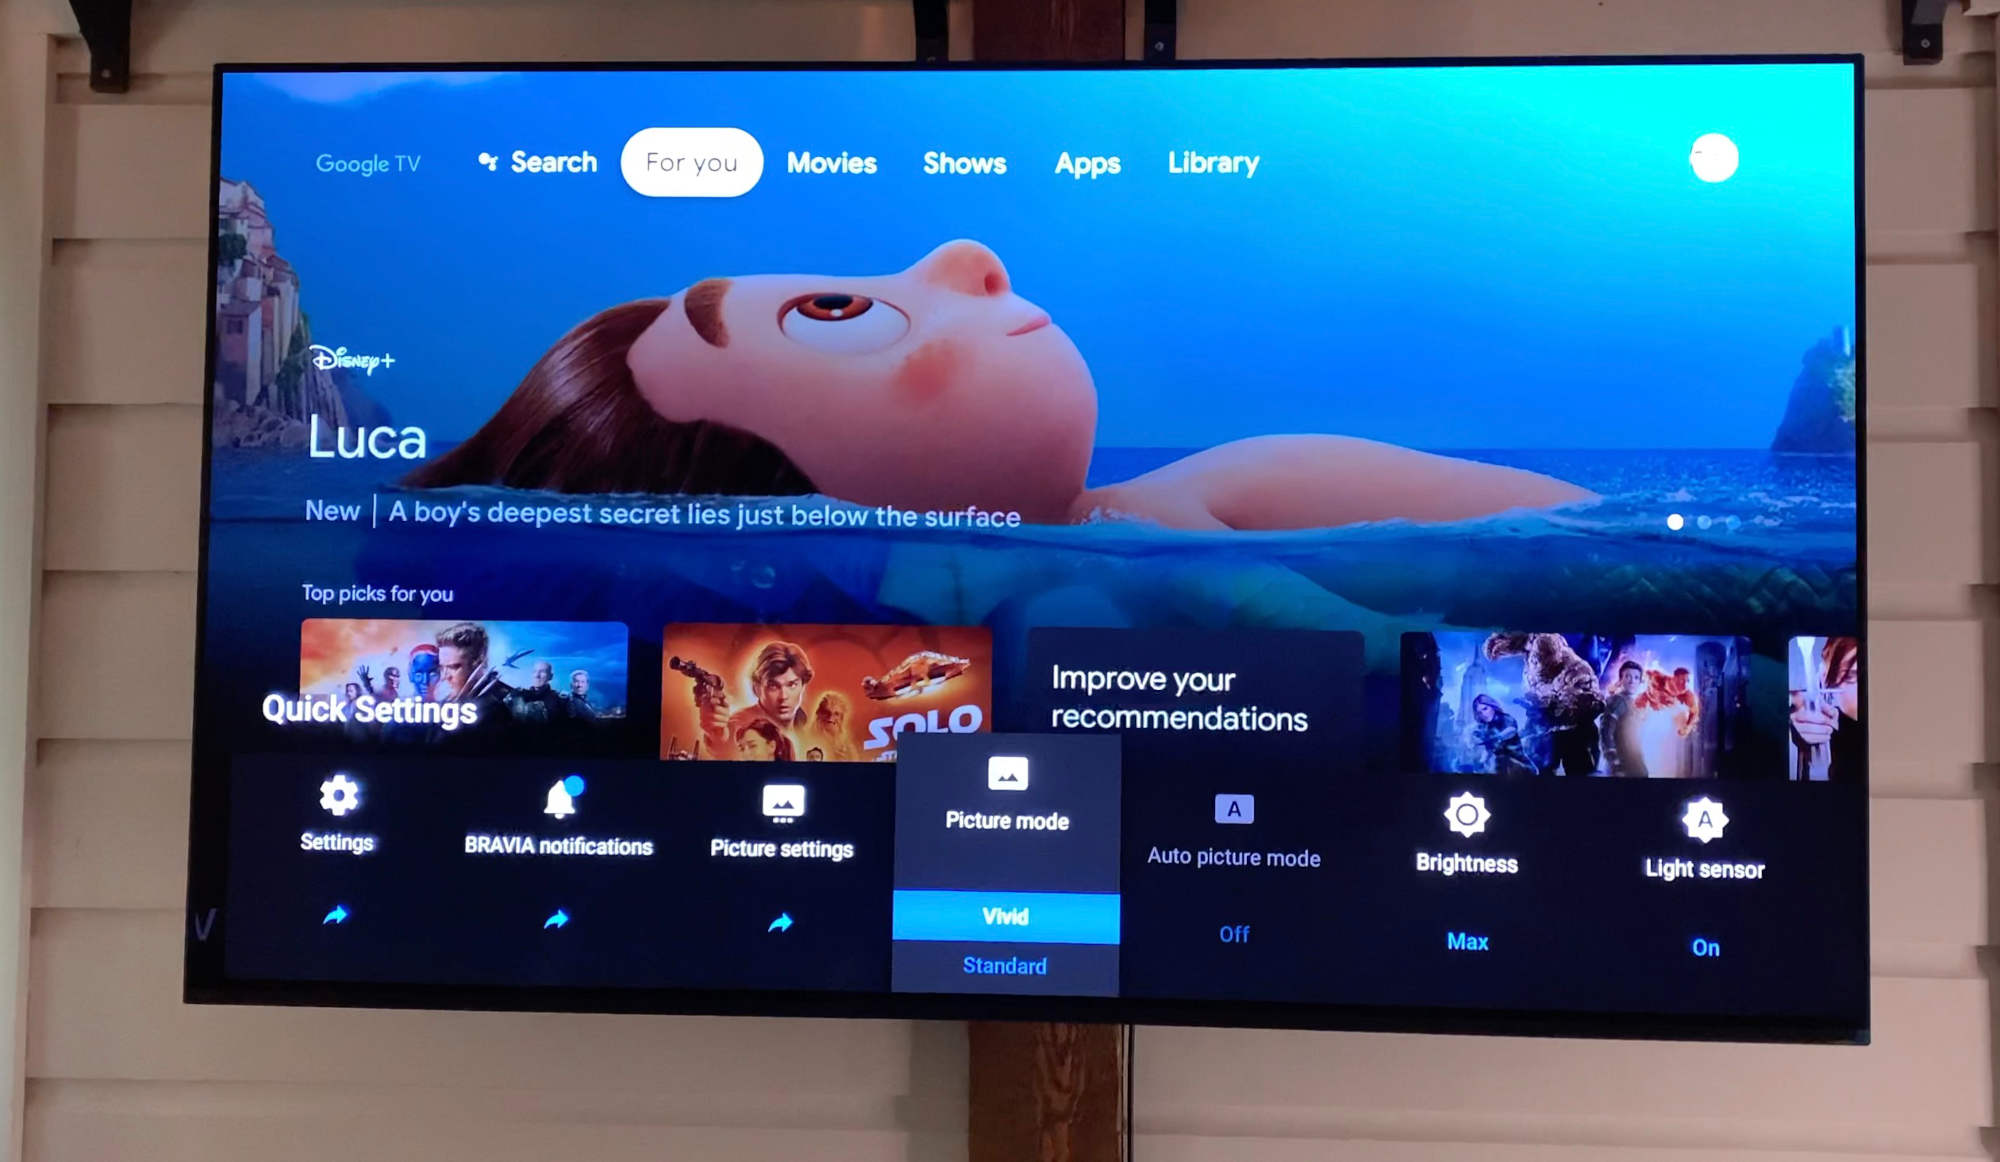 Google TV is the new Android TV, coming to Sony smart TVs this year - CNET